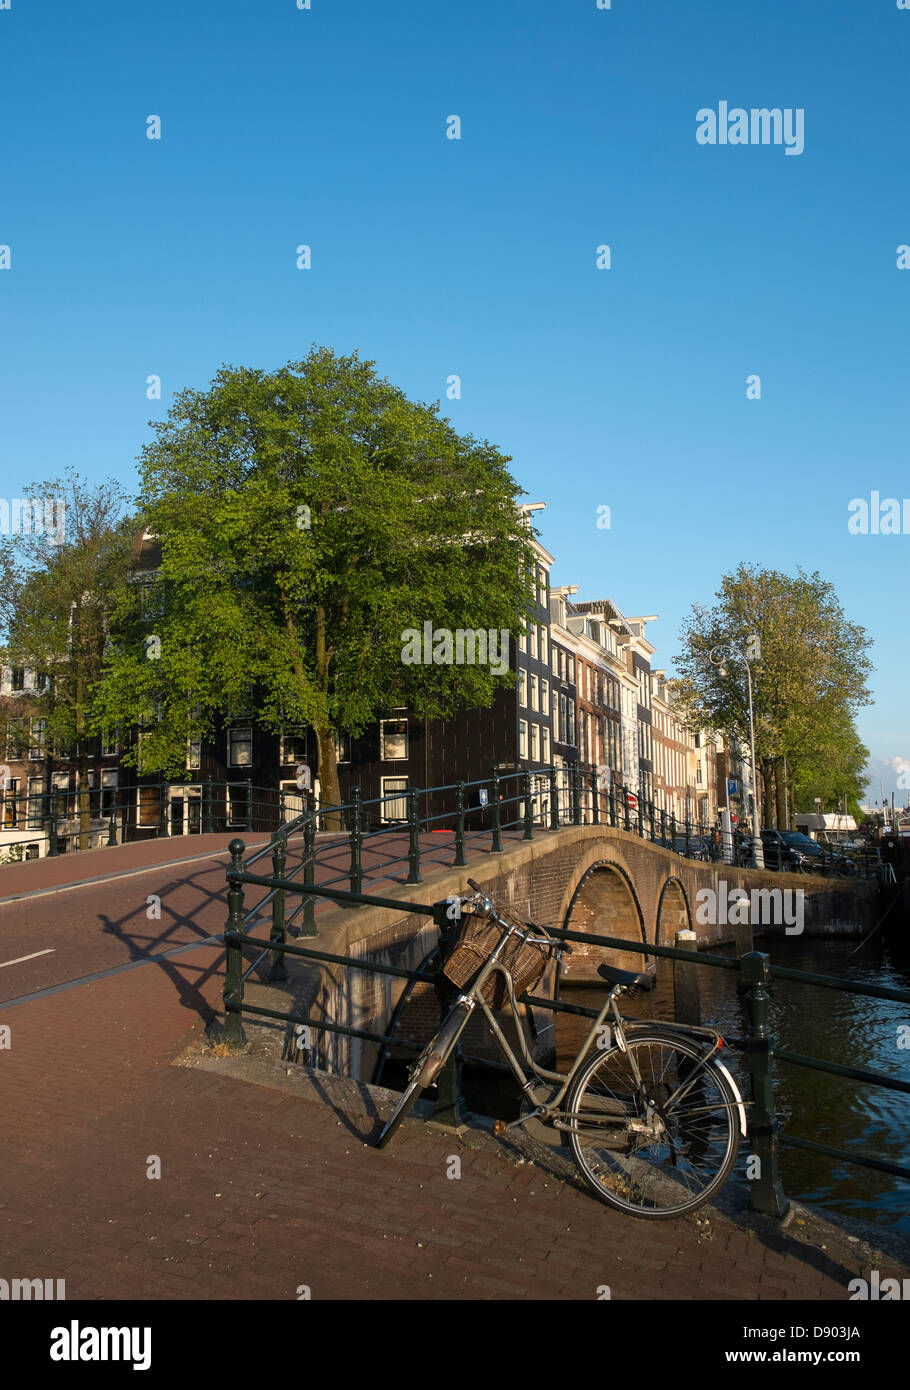 Netherlands, Amsterdam, Bicycle and Bridge on Reguliersgracht Stock Photo